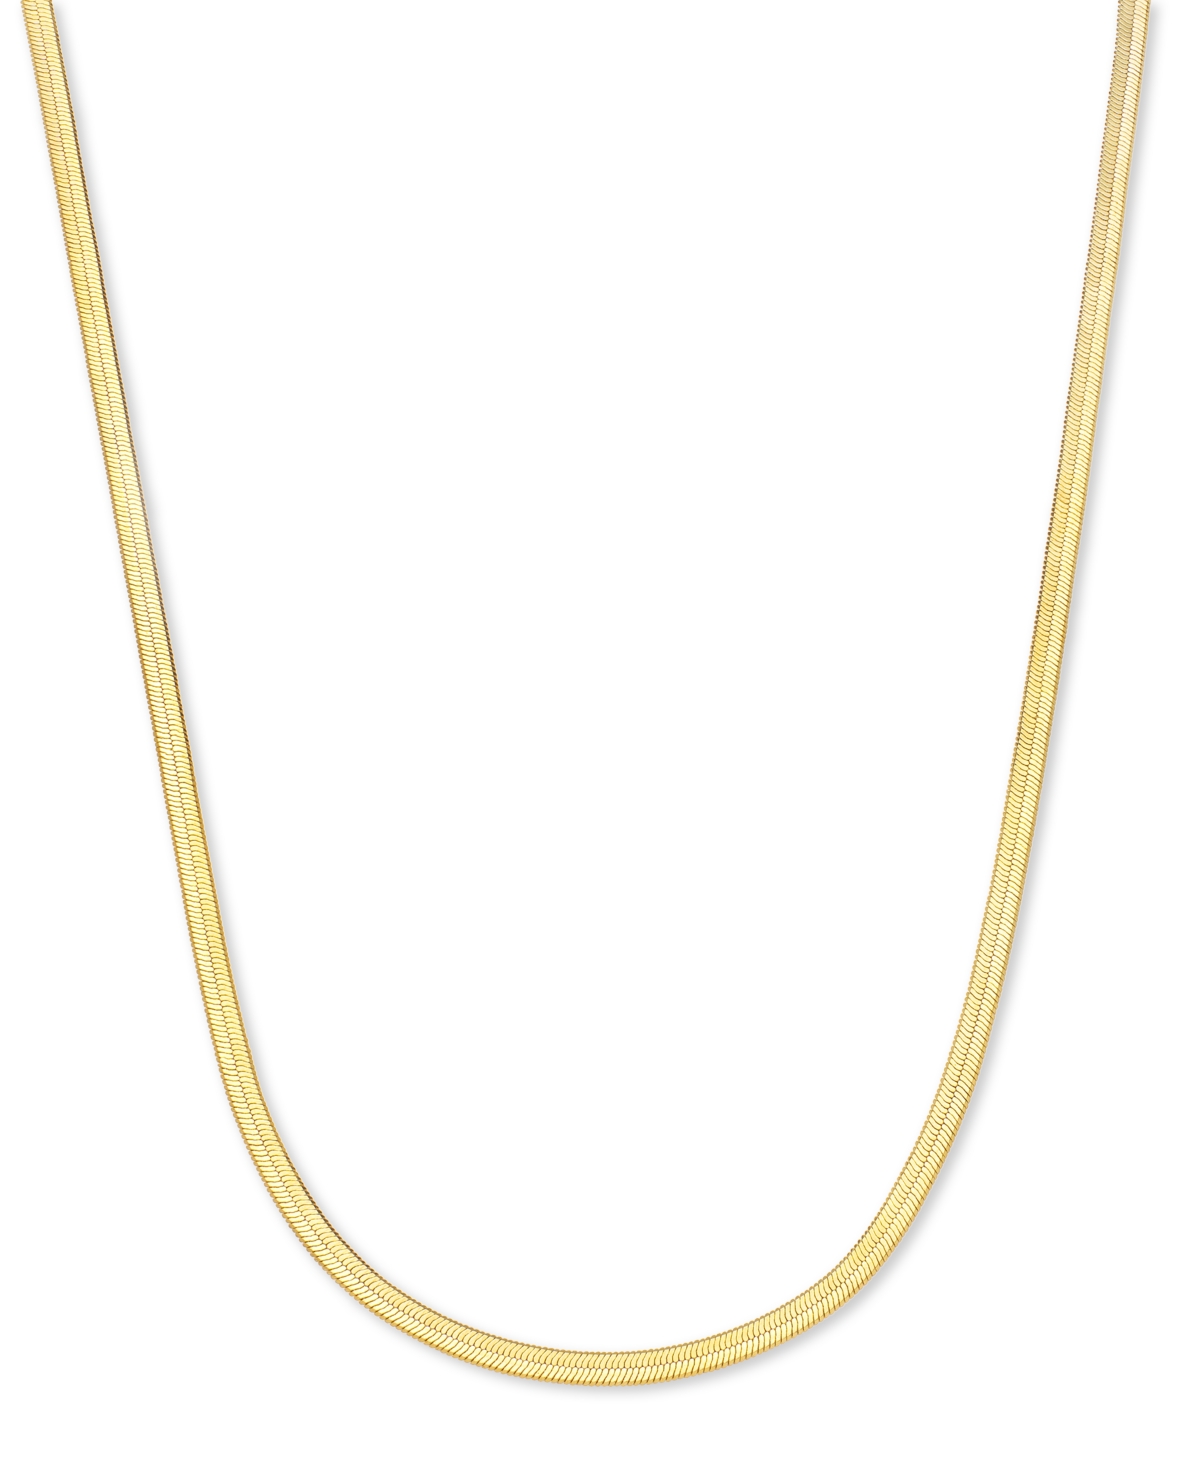 Lola Ade 18k Gold-plated Stainless Steel Herringbone Chain 17-3/4" Collar Necklace